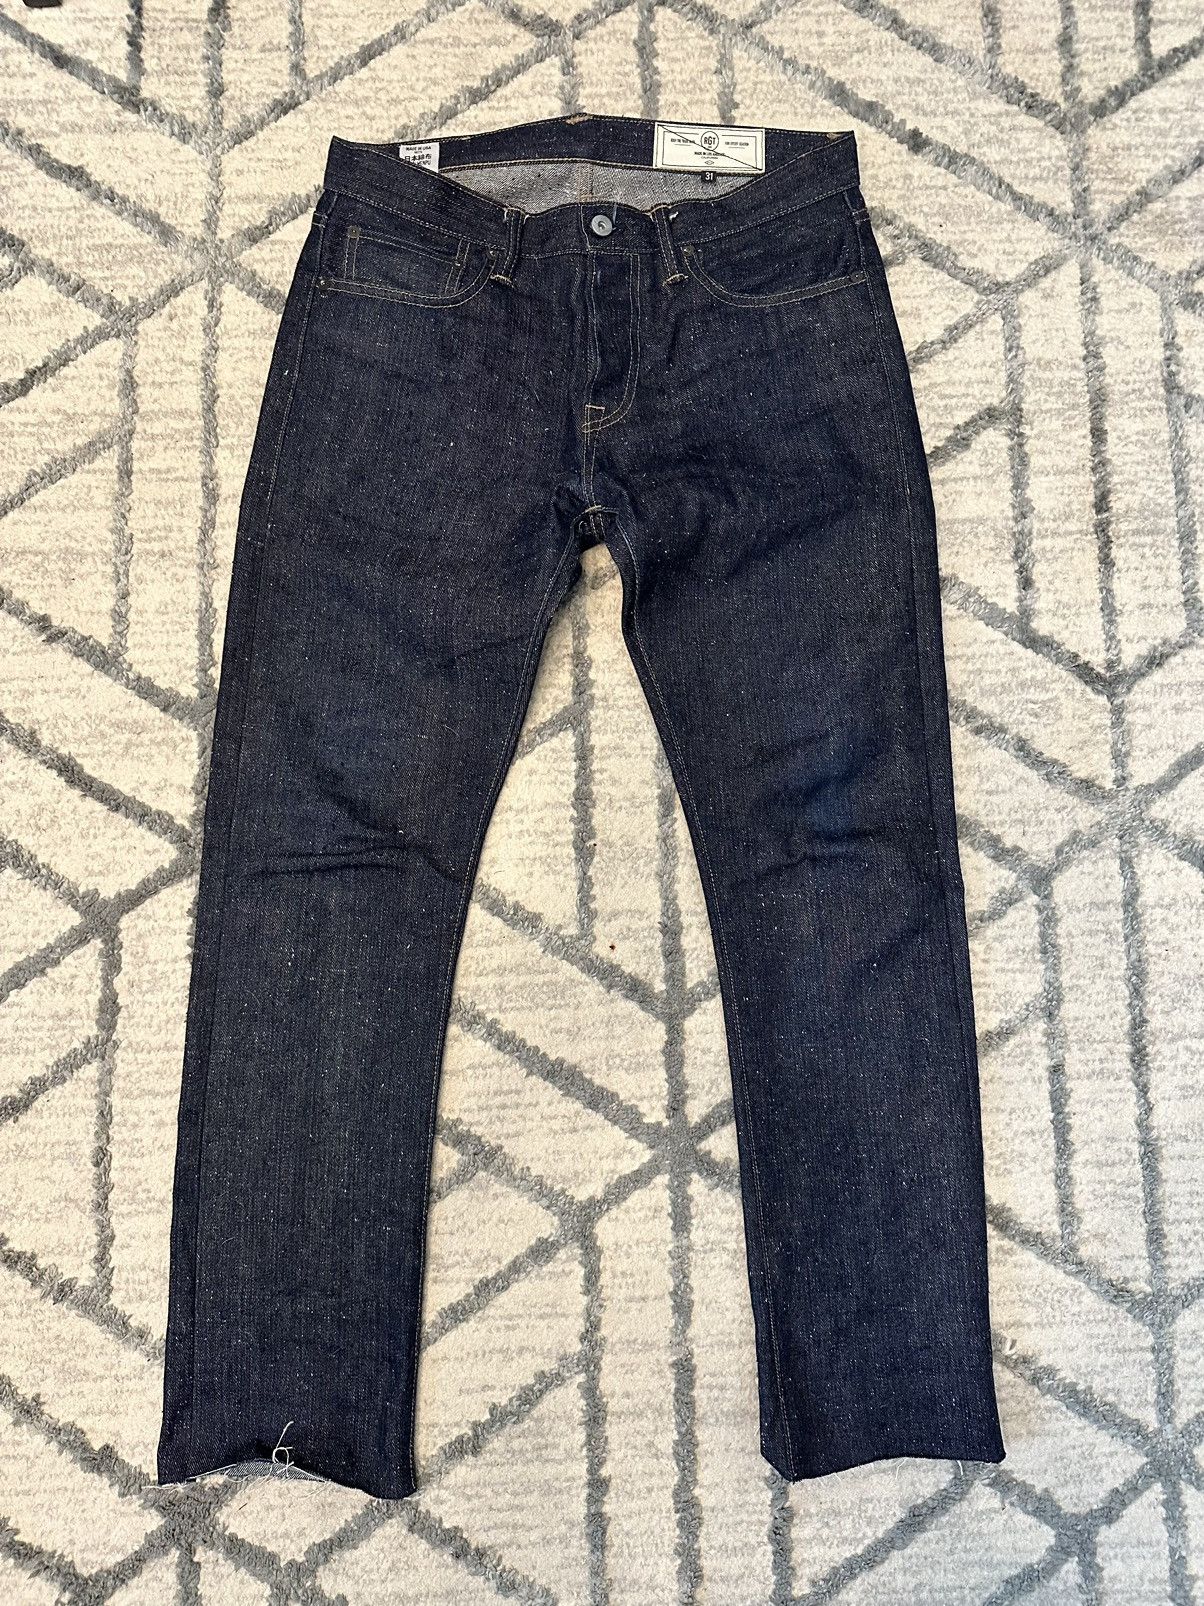 Rogue Territory Rogue Territory 14oz SK Neppy Size US 31 - 2 Preview